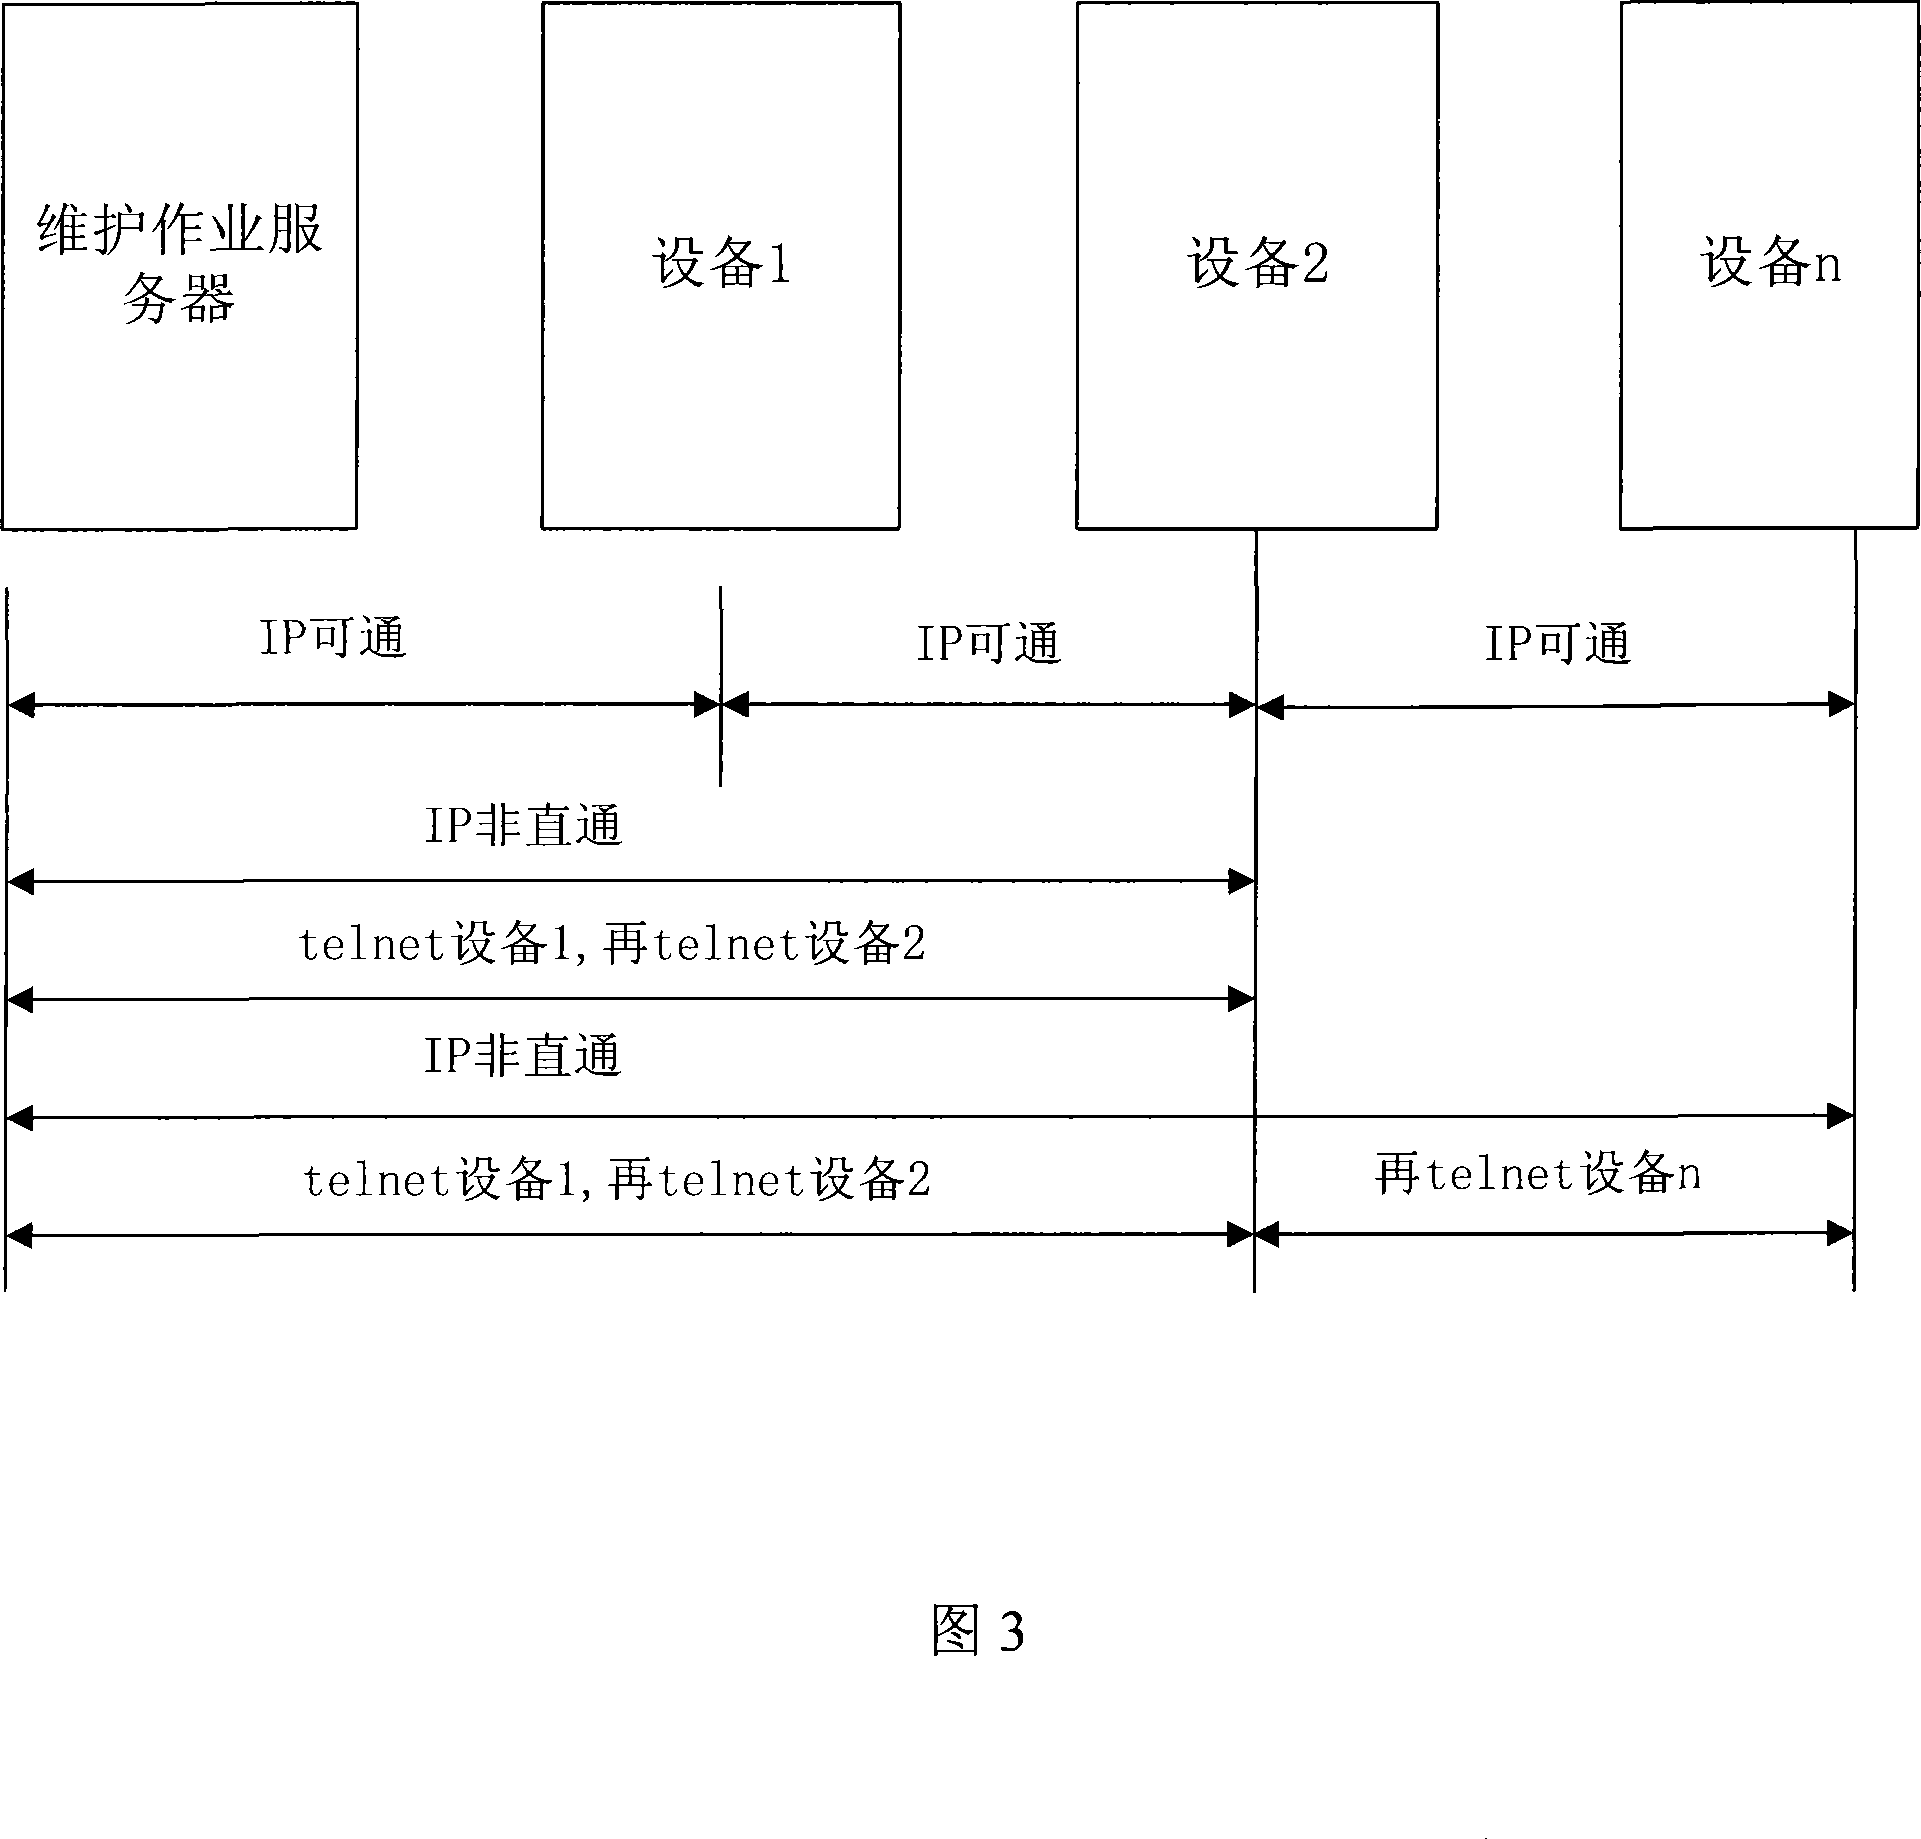 A method for the operation of device maintenance